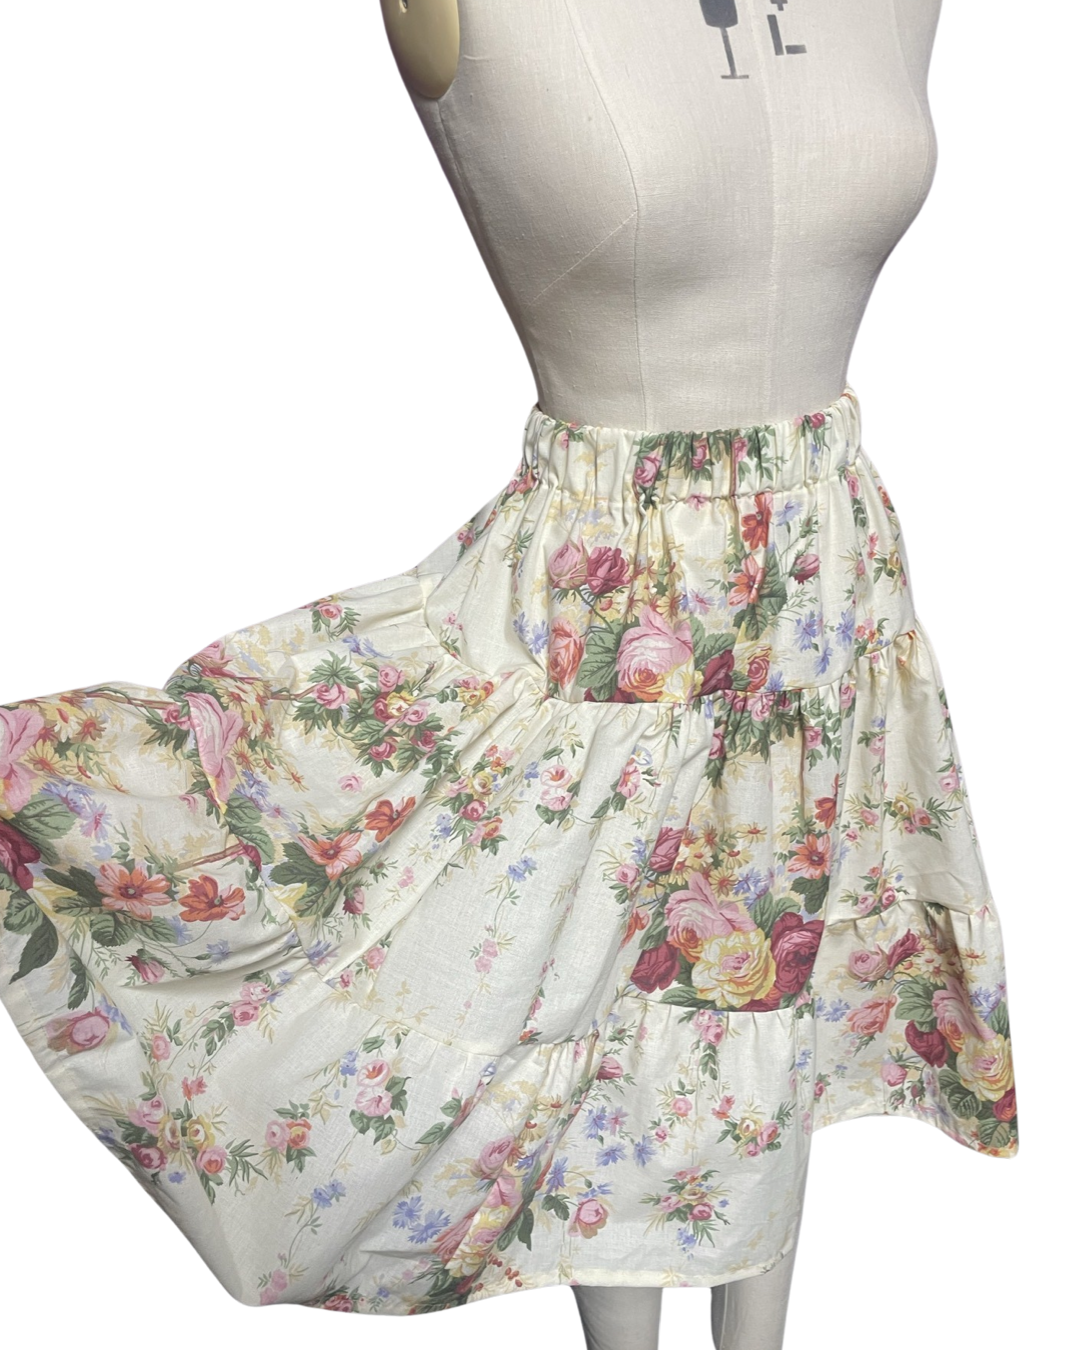 English Rose Vintage fabric Tiered Skirt. One of a kind.